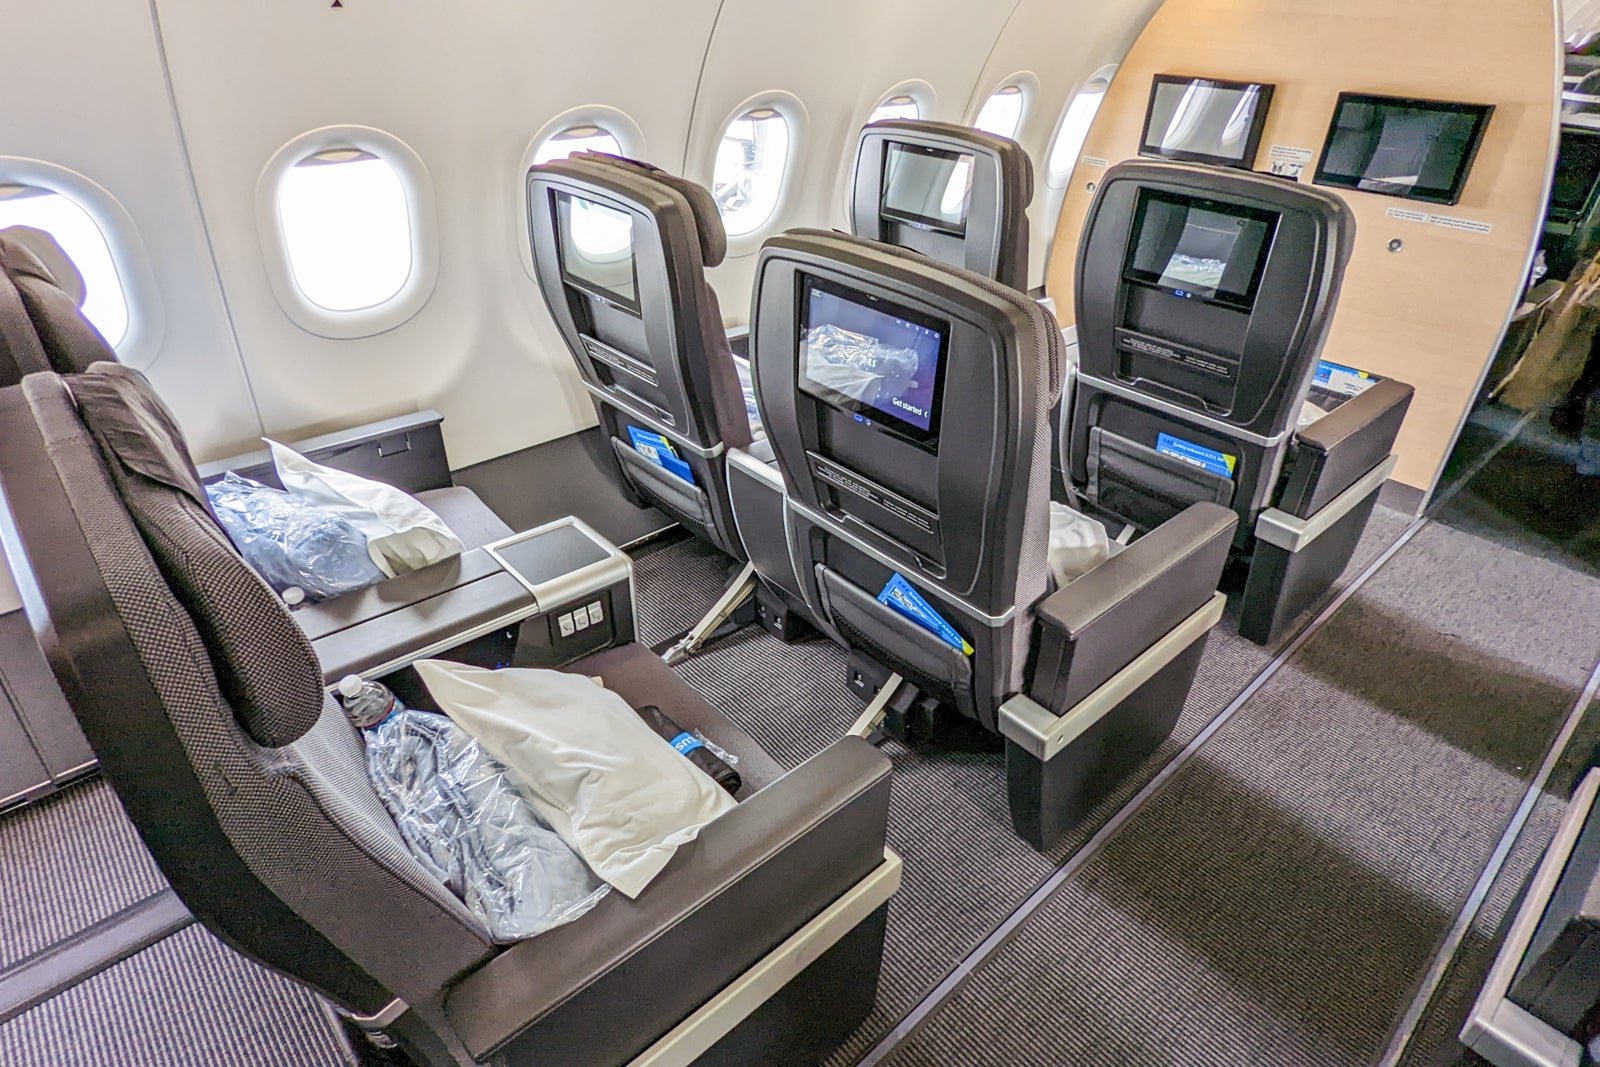 Flying premium economy on Airlines' new A321LR from Washington to The Points Guy